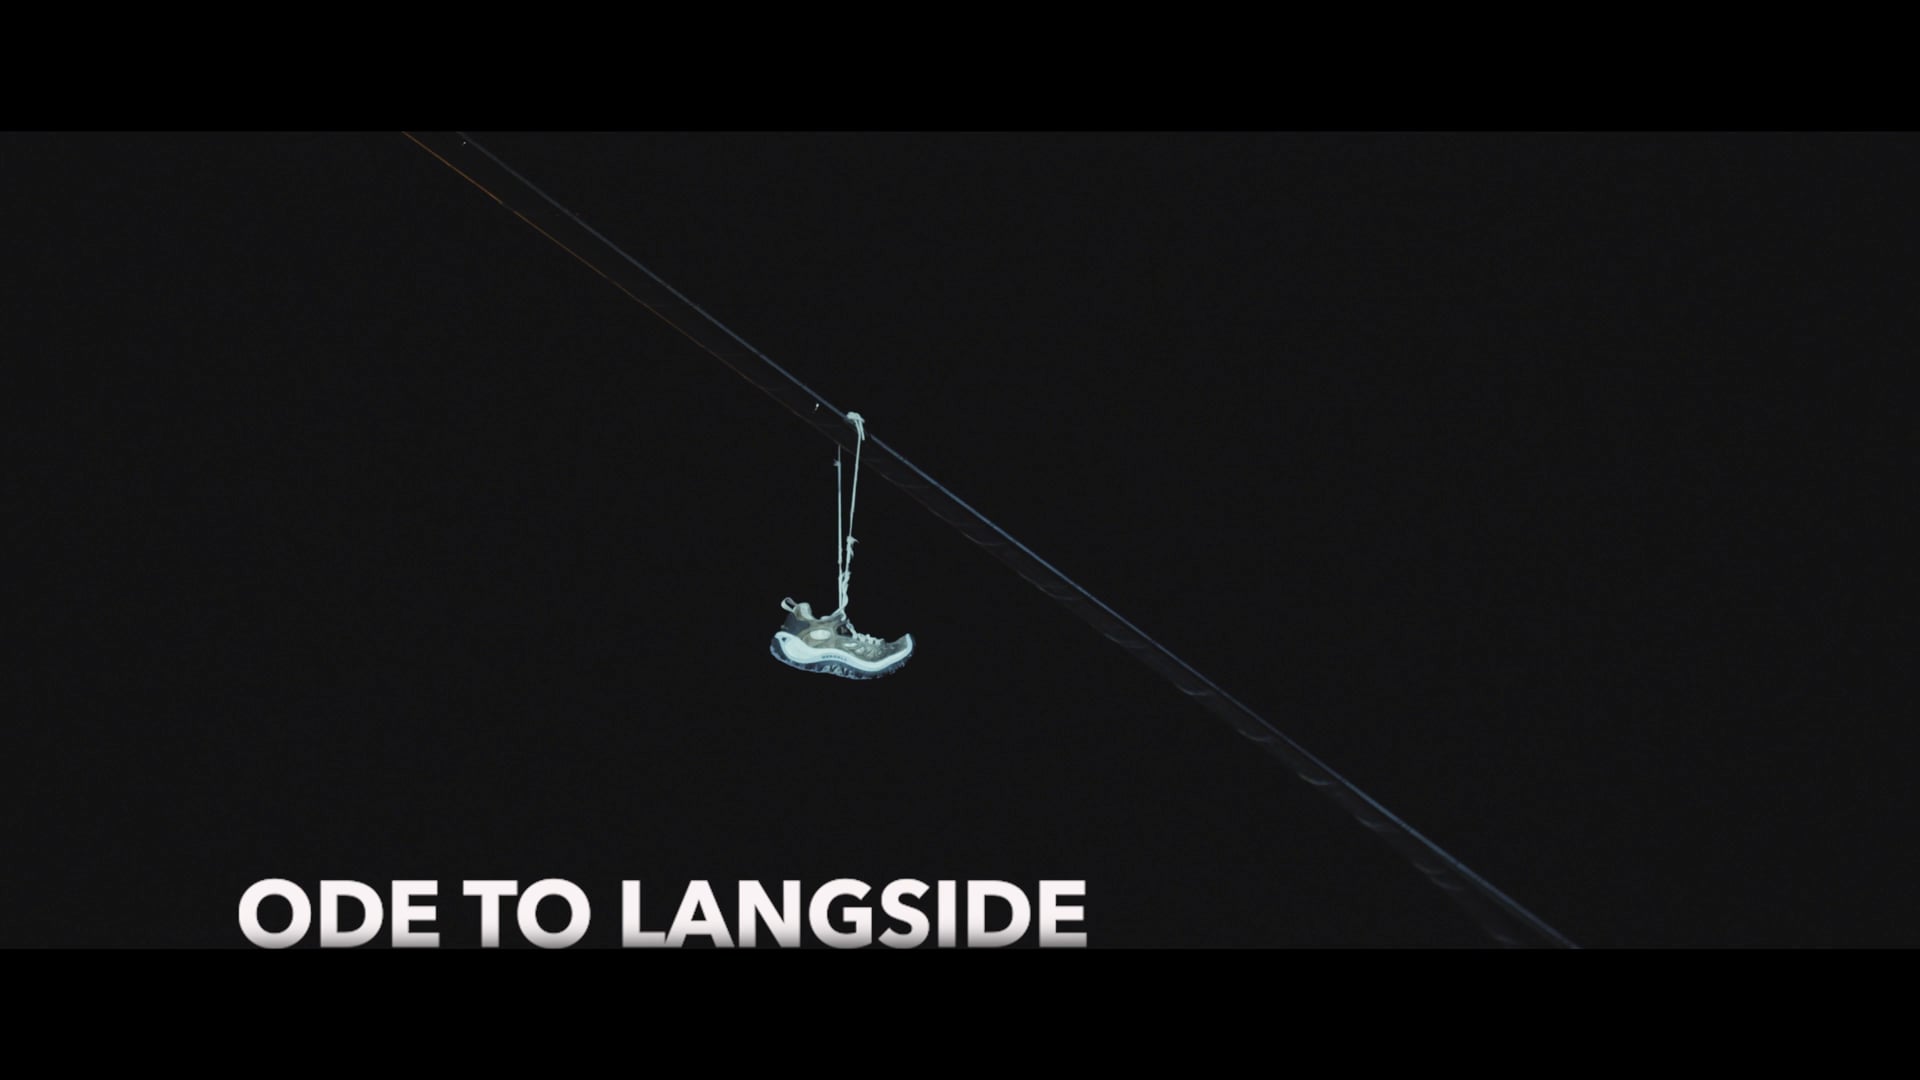 Ode to Langside (The Drift)